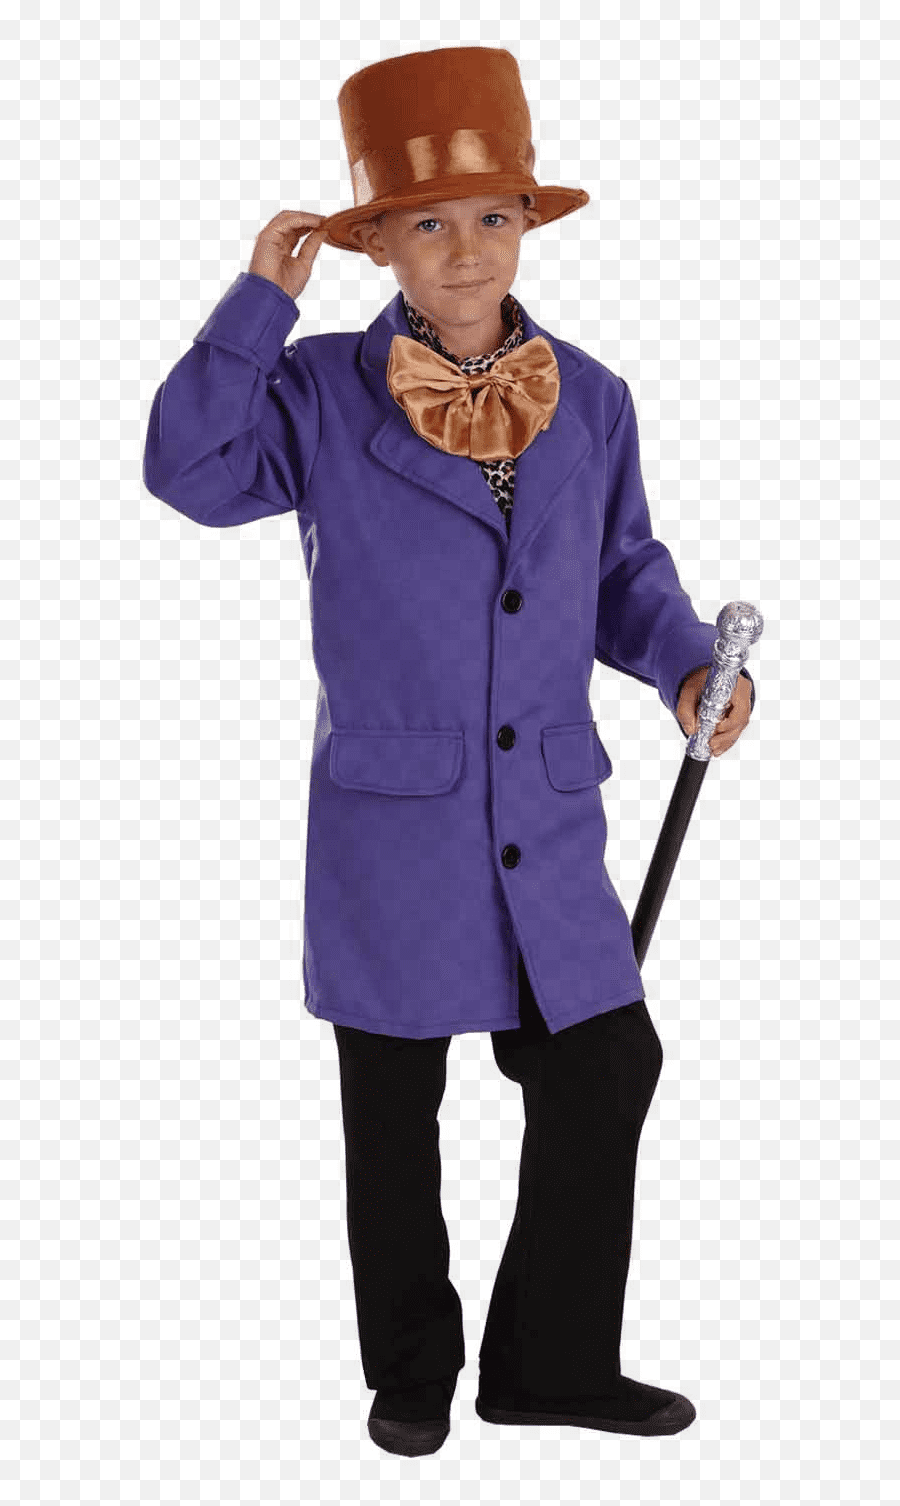 Child Willy Wonka Costume Boys Chocolate Factory Fancy Dress Outfit Book Week Medium - Willy Wonka Child Costume Emoji,Emoji Outfits Boys